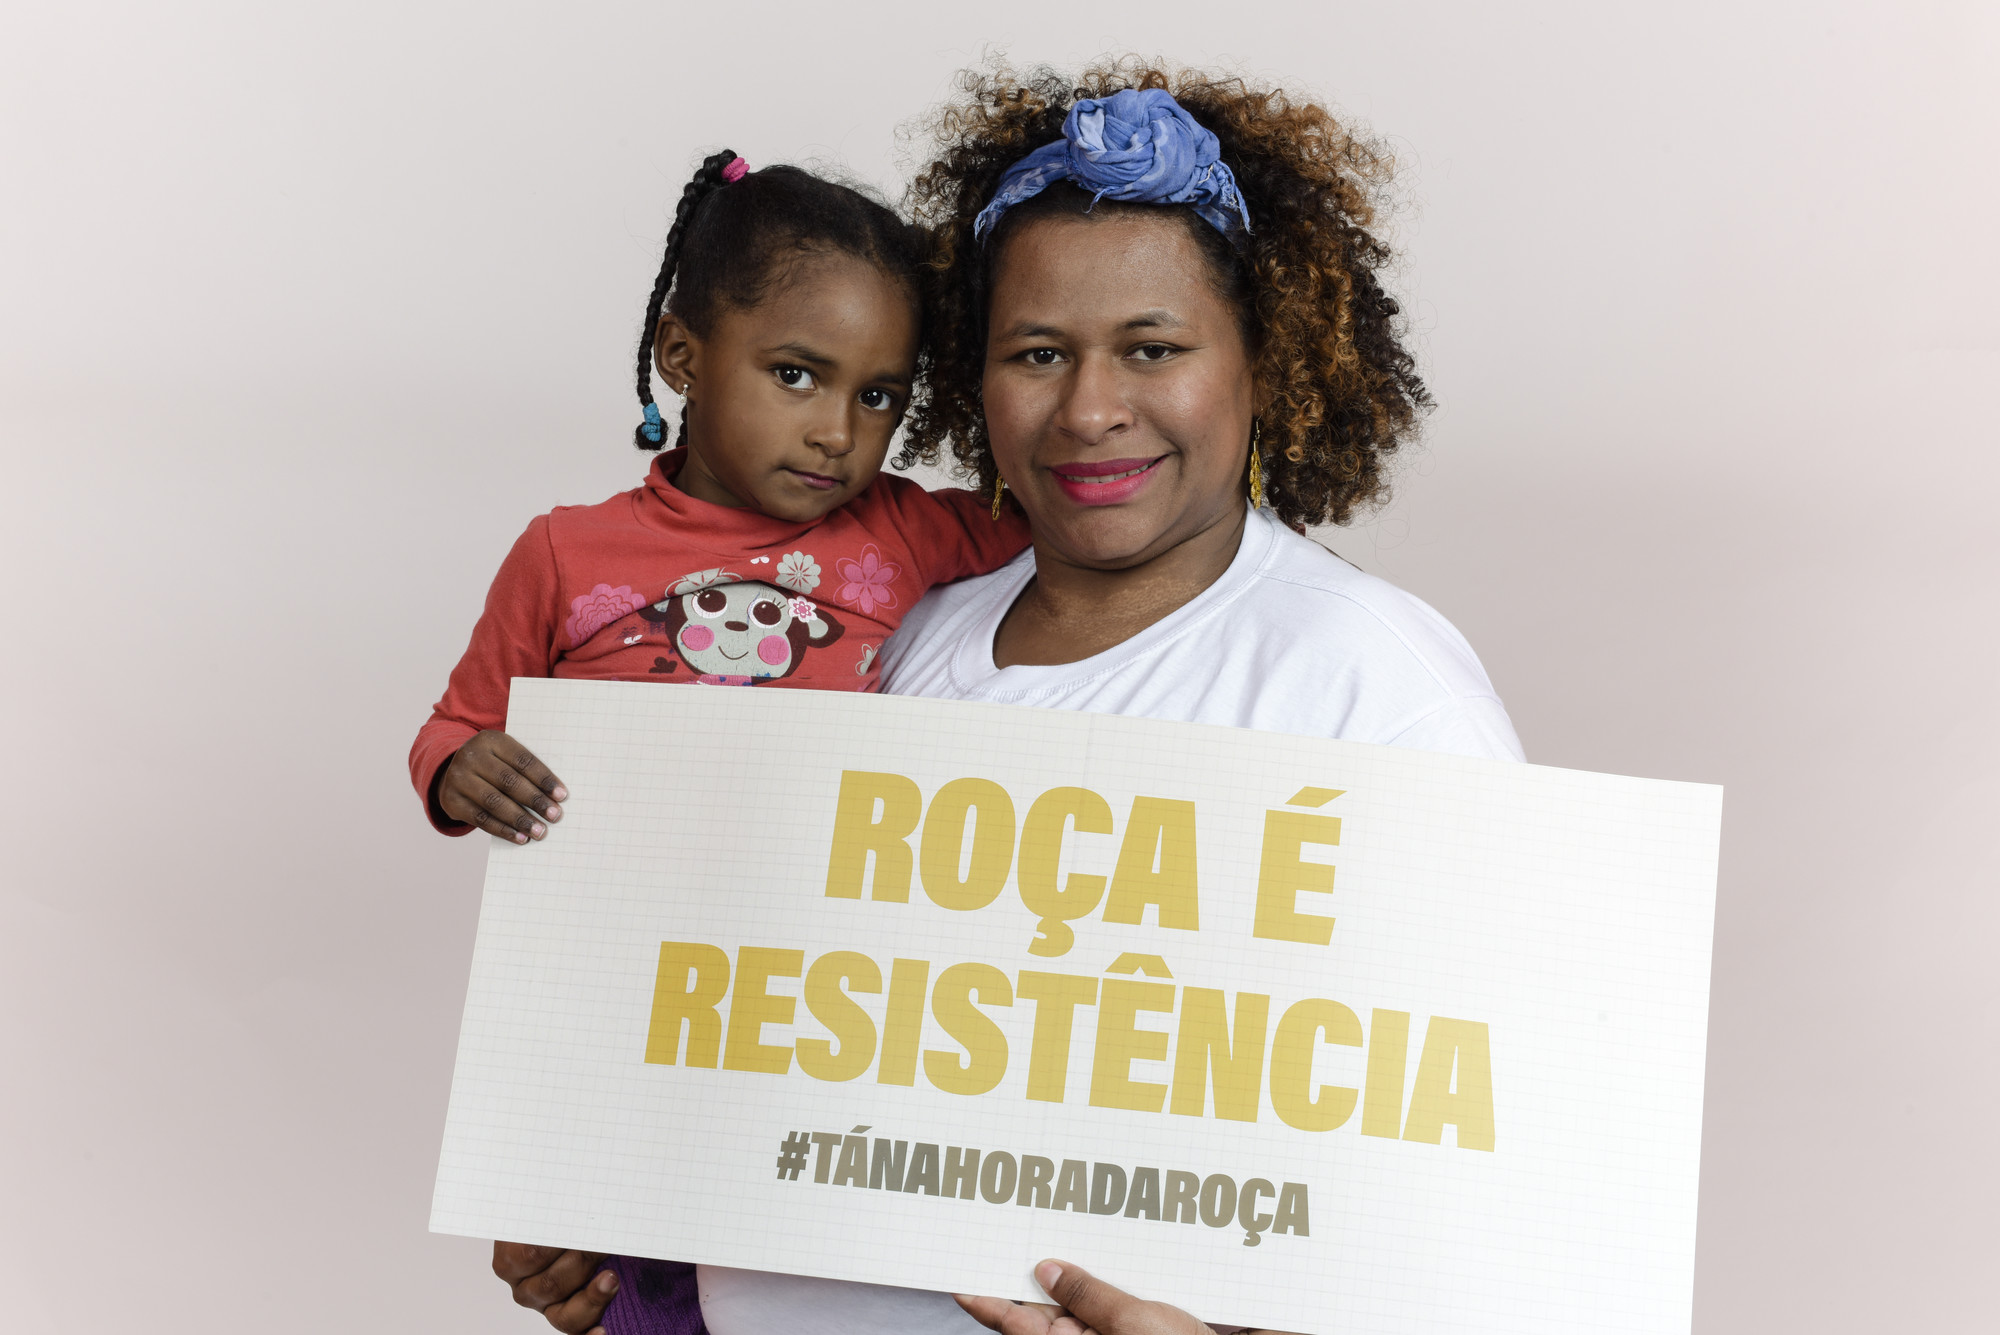 Heloisa de França Dias with her daughter Crislaine Gabrielle de França e Silva, from Quilombo São Pedro, in the campaign "It's time for the roça", which aimed to pressure the government of São Paulo to issue licenses for traditional quilombola gardens. The launch of the campaign took place during the 11th Seeds and Seedlings Exchange Fair of the Quilombola Communities of Vale do Ribeira, Eldorado @Claudio Tavares / ISA